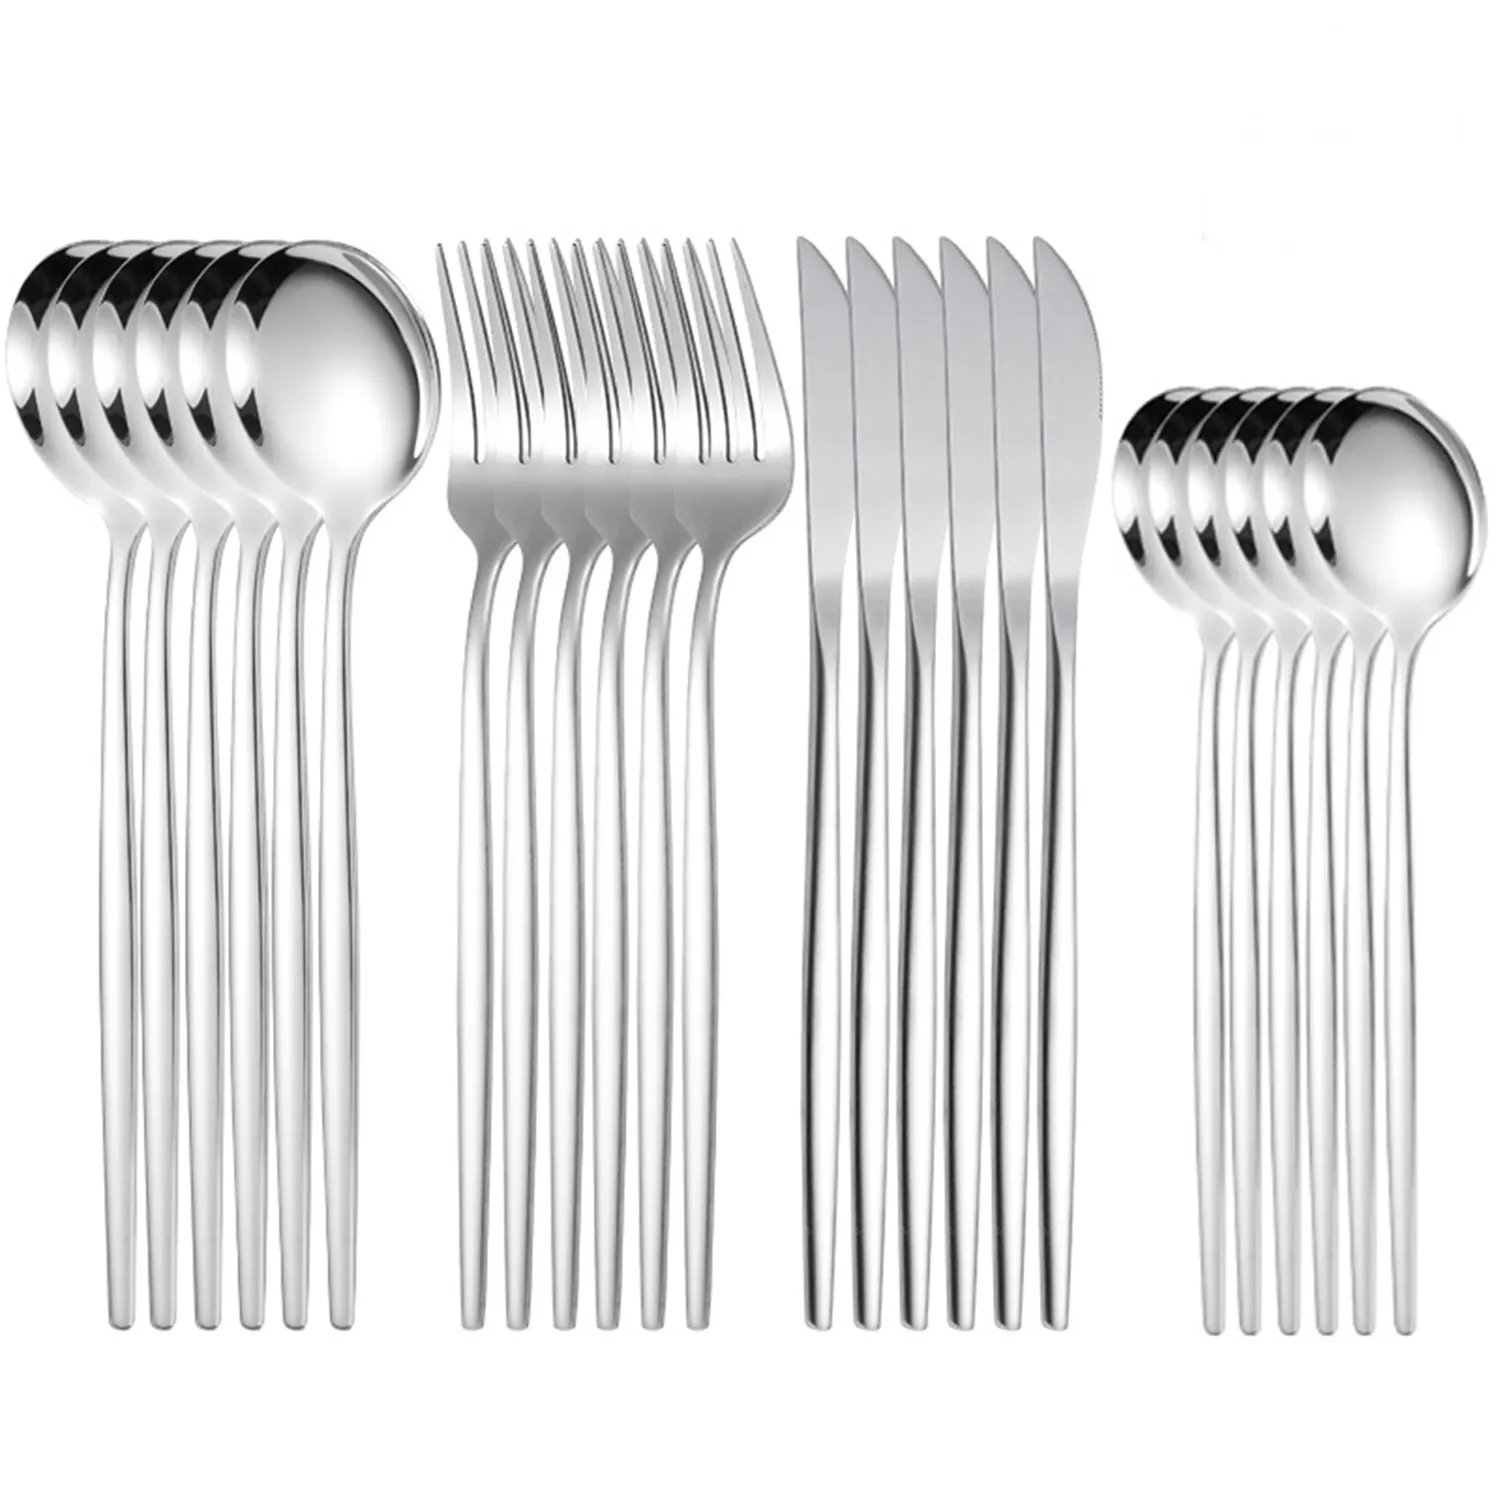 High Quality Portuguese Stainless steel Restaurant Wedding Hotel Use Silverware Silver Flatware Cutlery Set